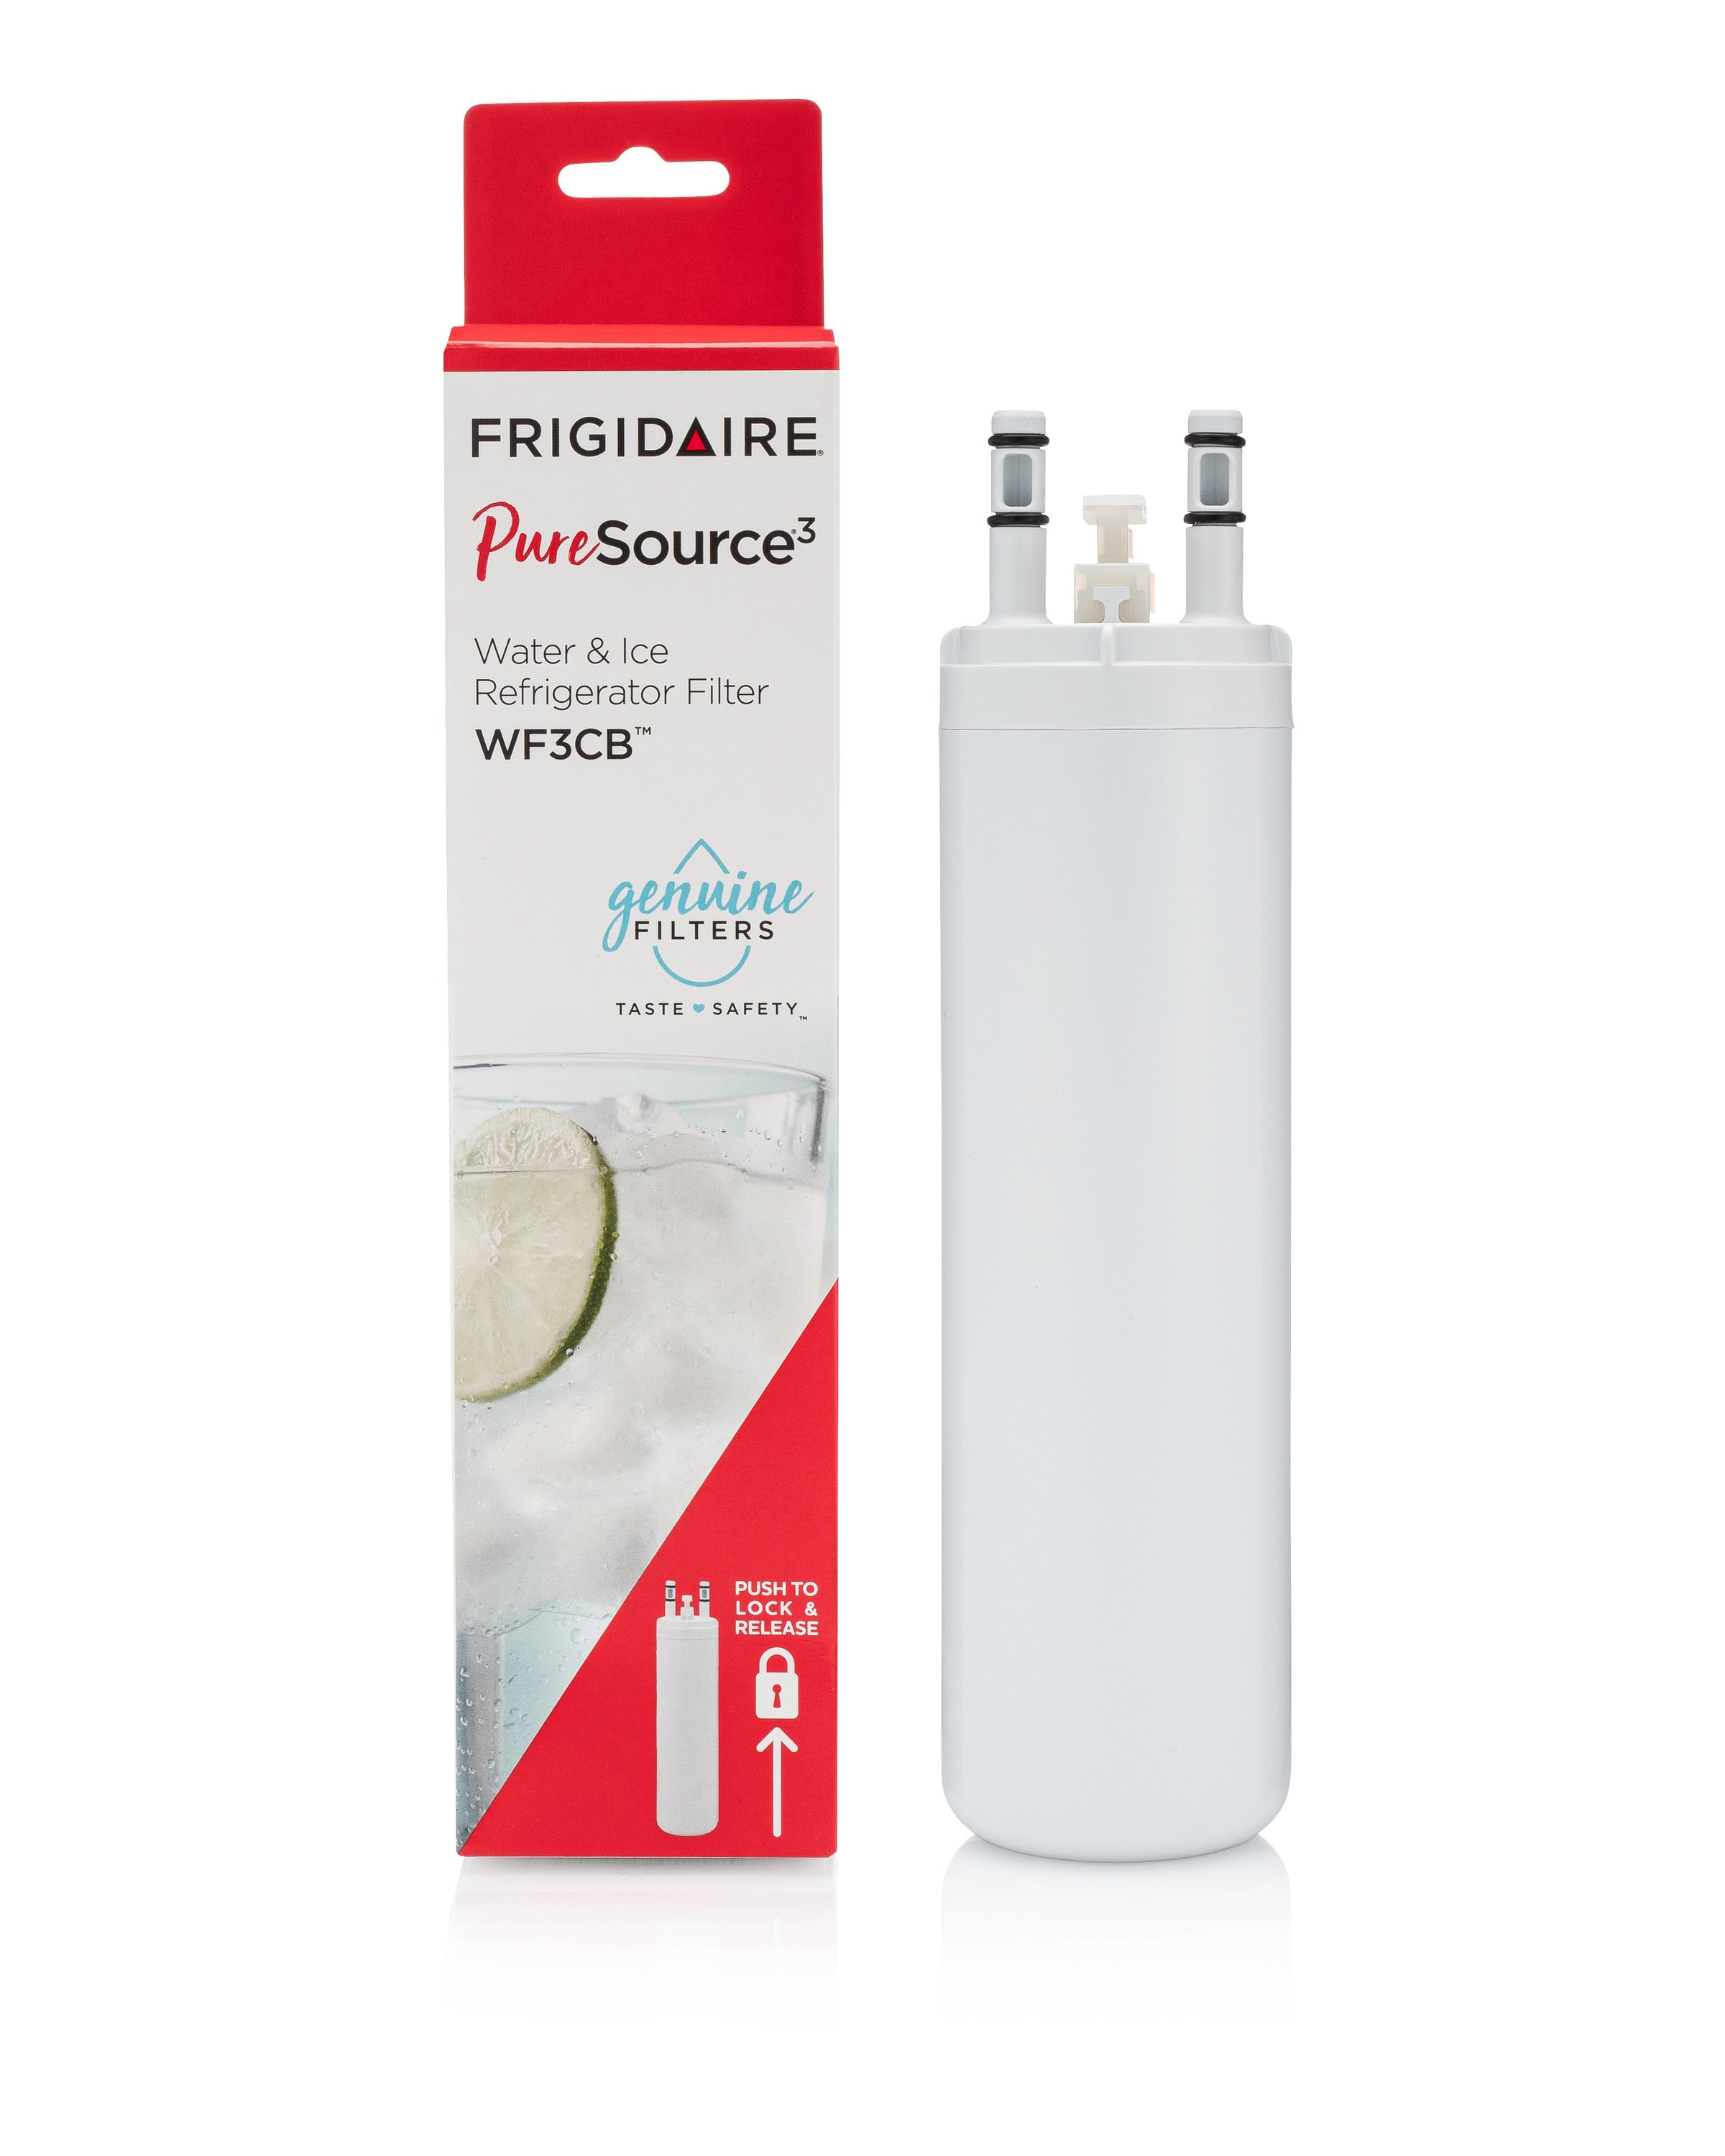 wf3cb-puresource-3-refrigerator-water-filters-at-lowes